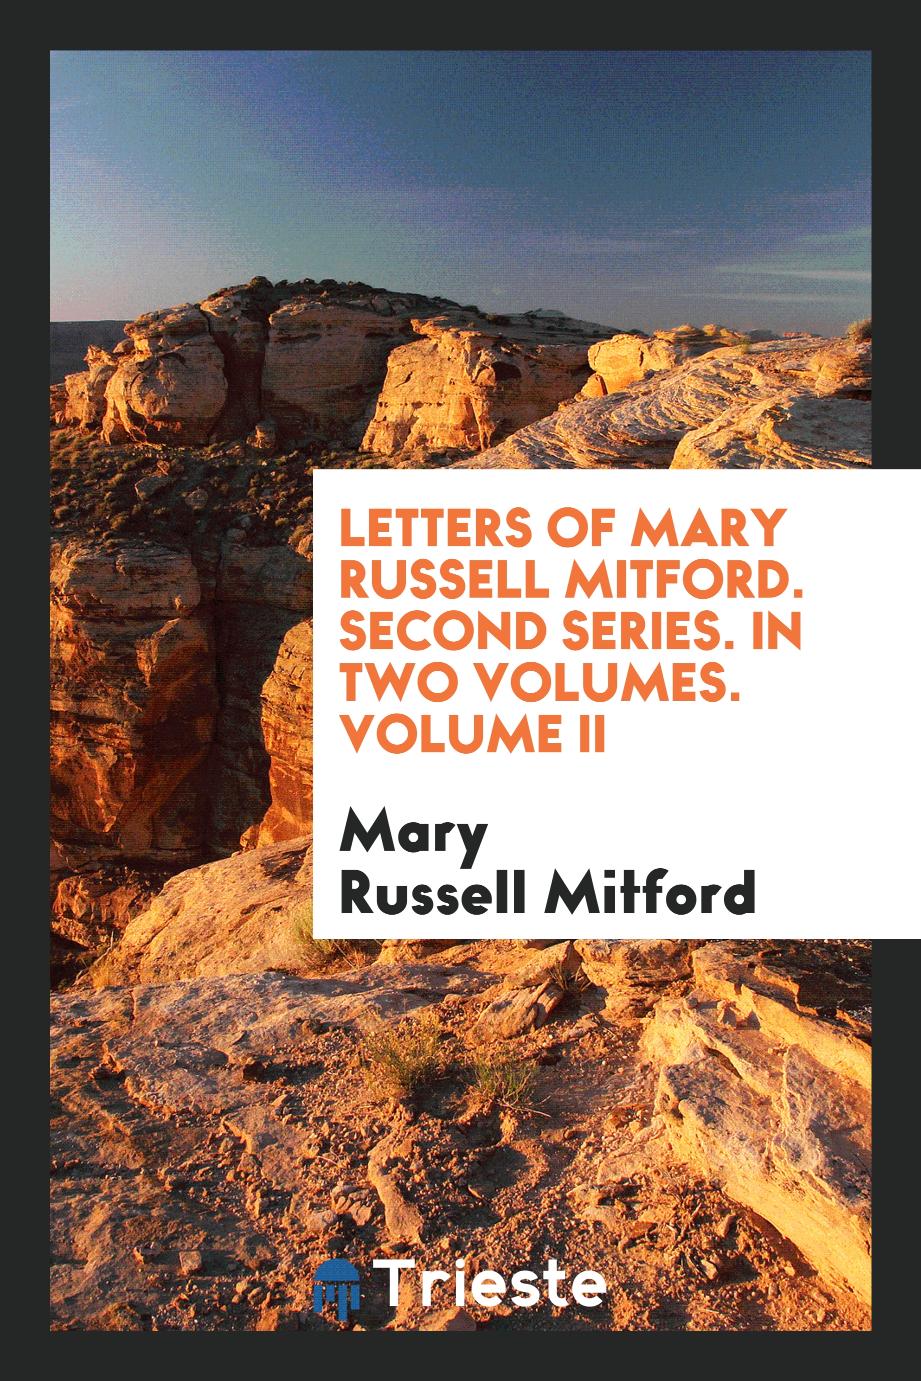 Letters of Mary Russell Mitford. Second Series. In Two Volumes. Volume II